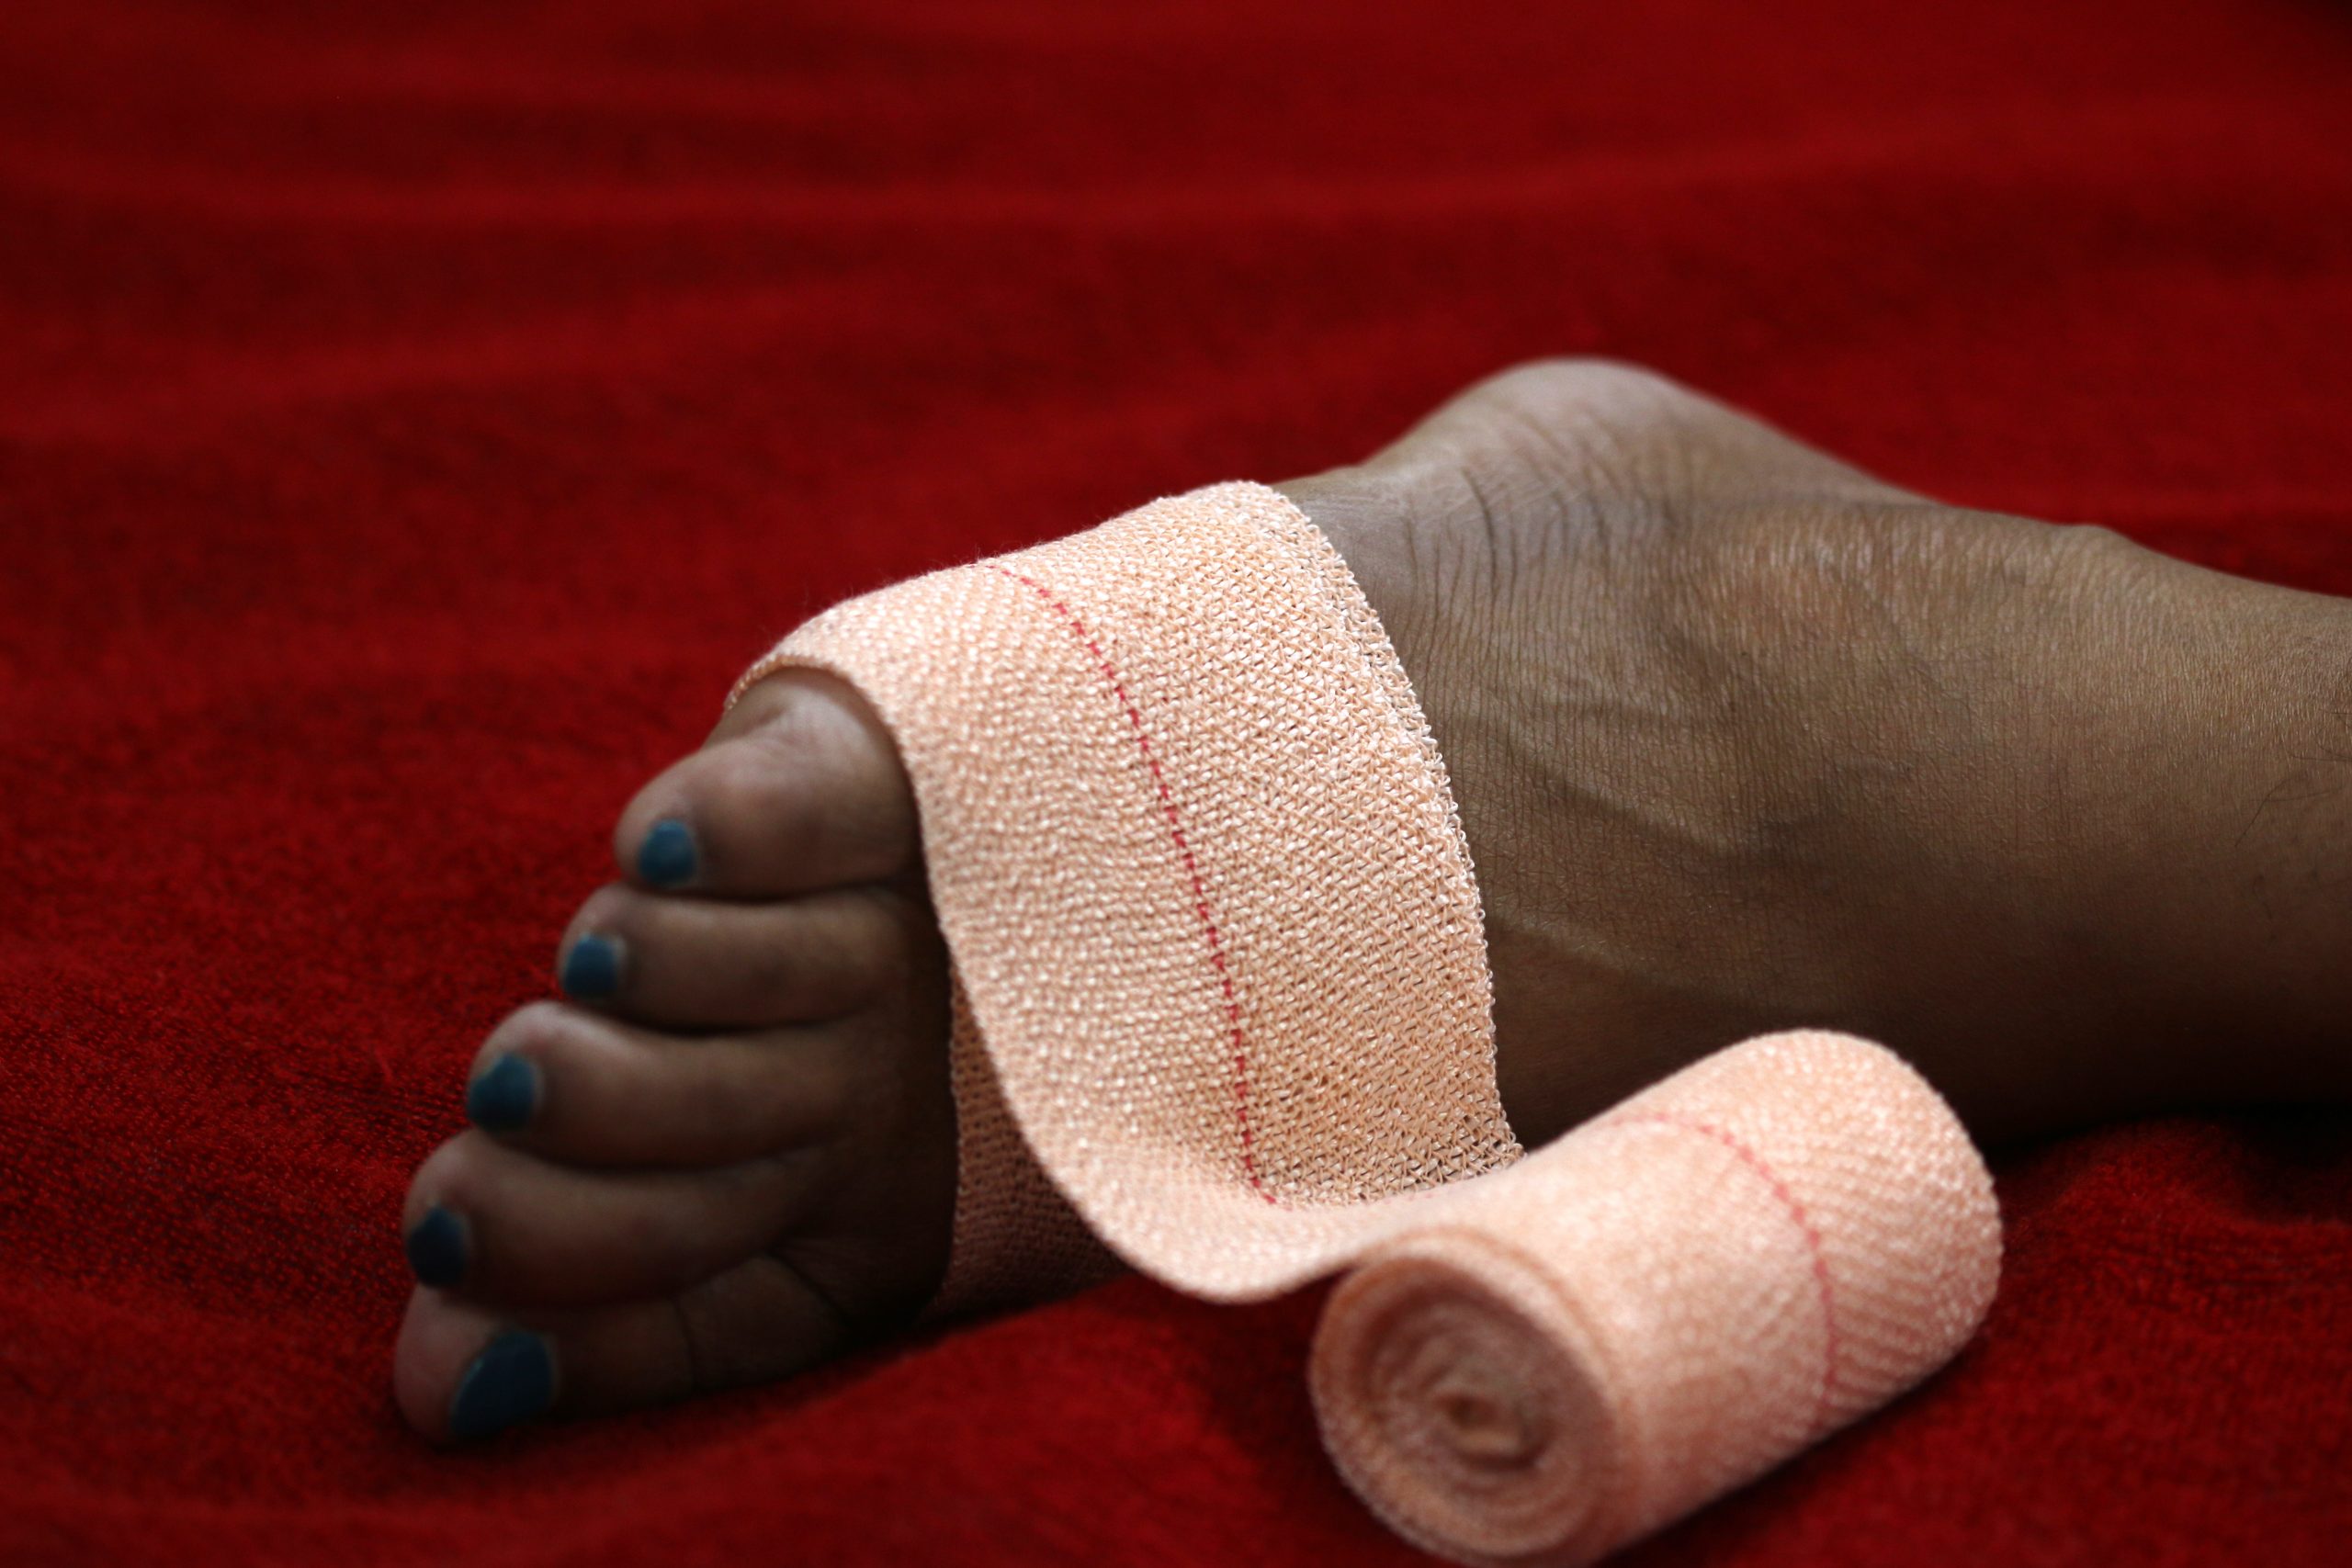 An injured foot with bandage on it.